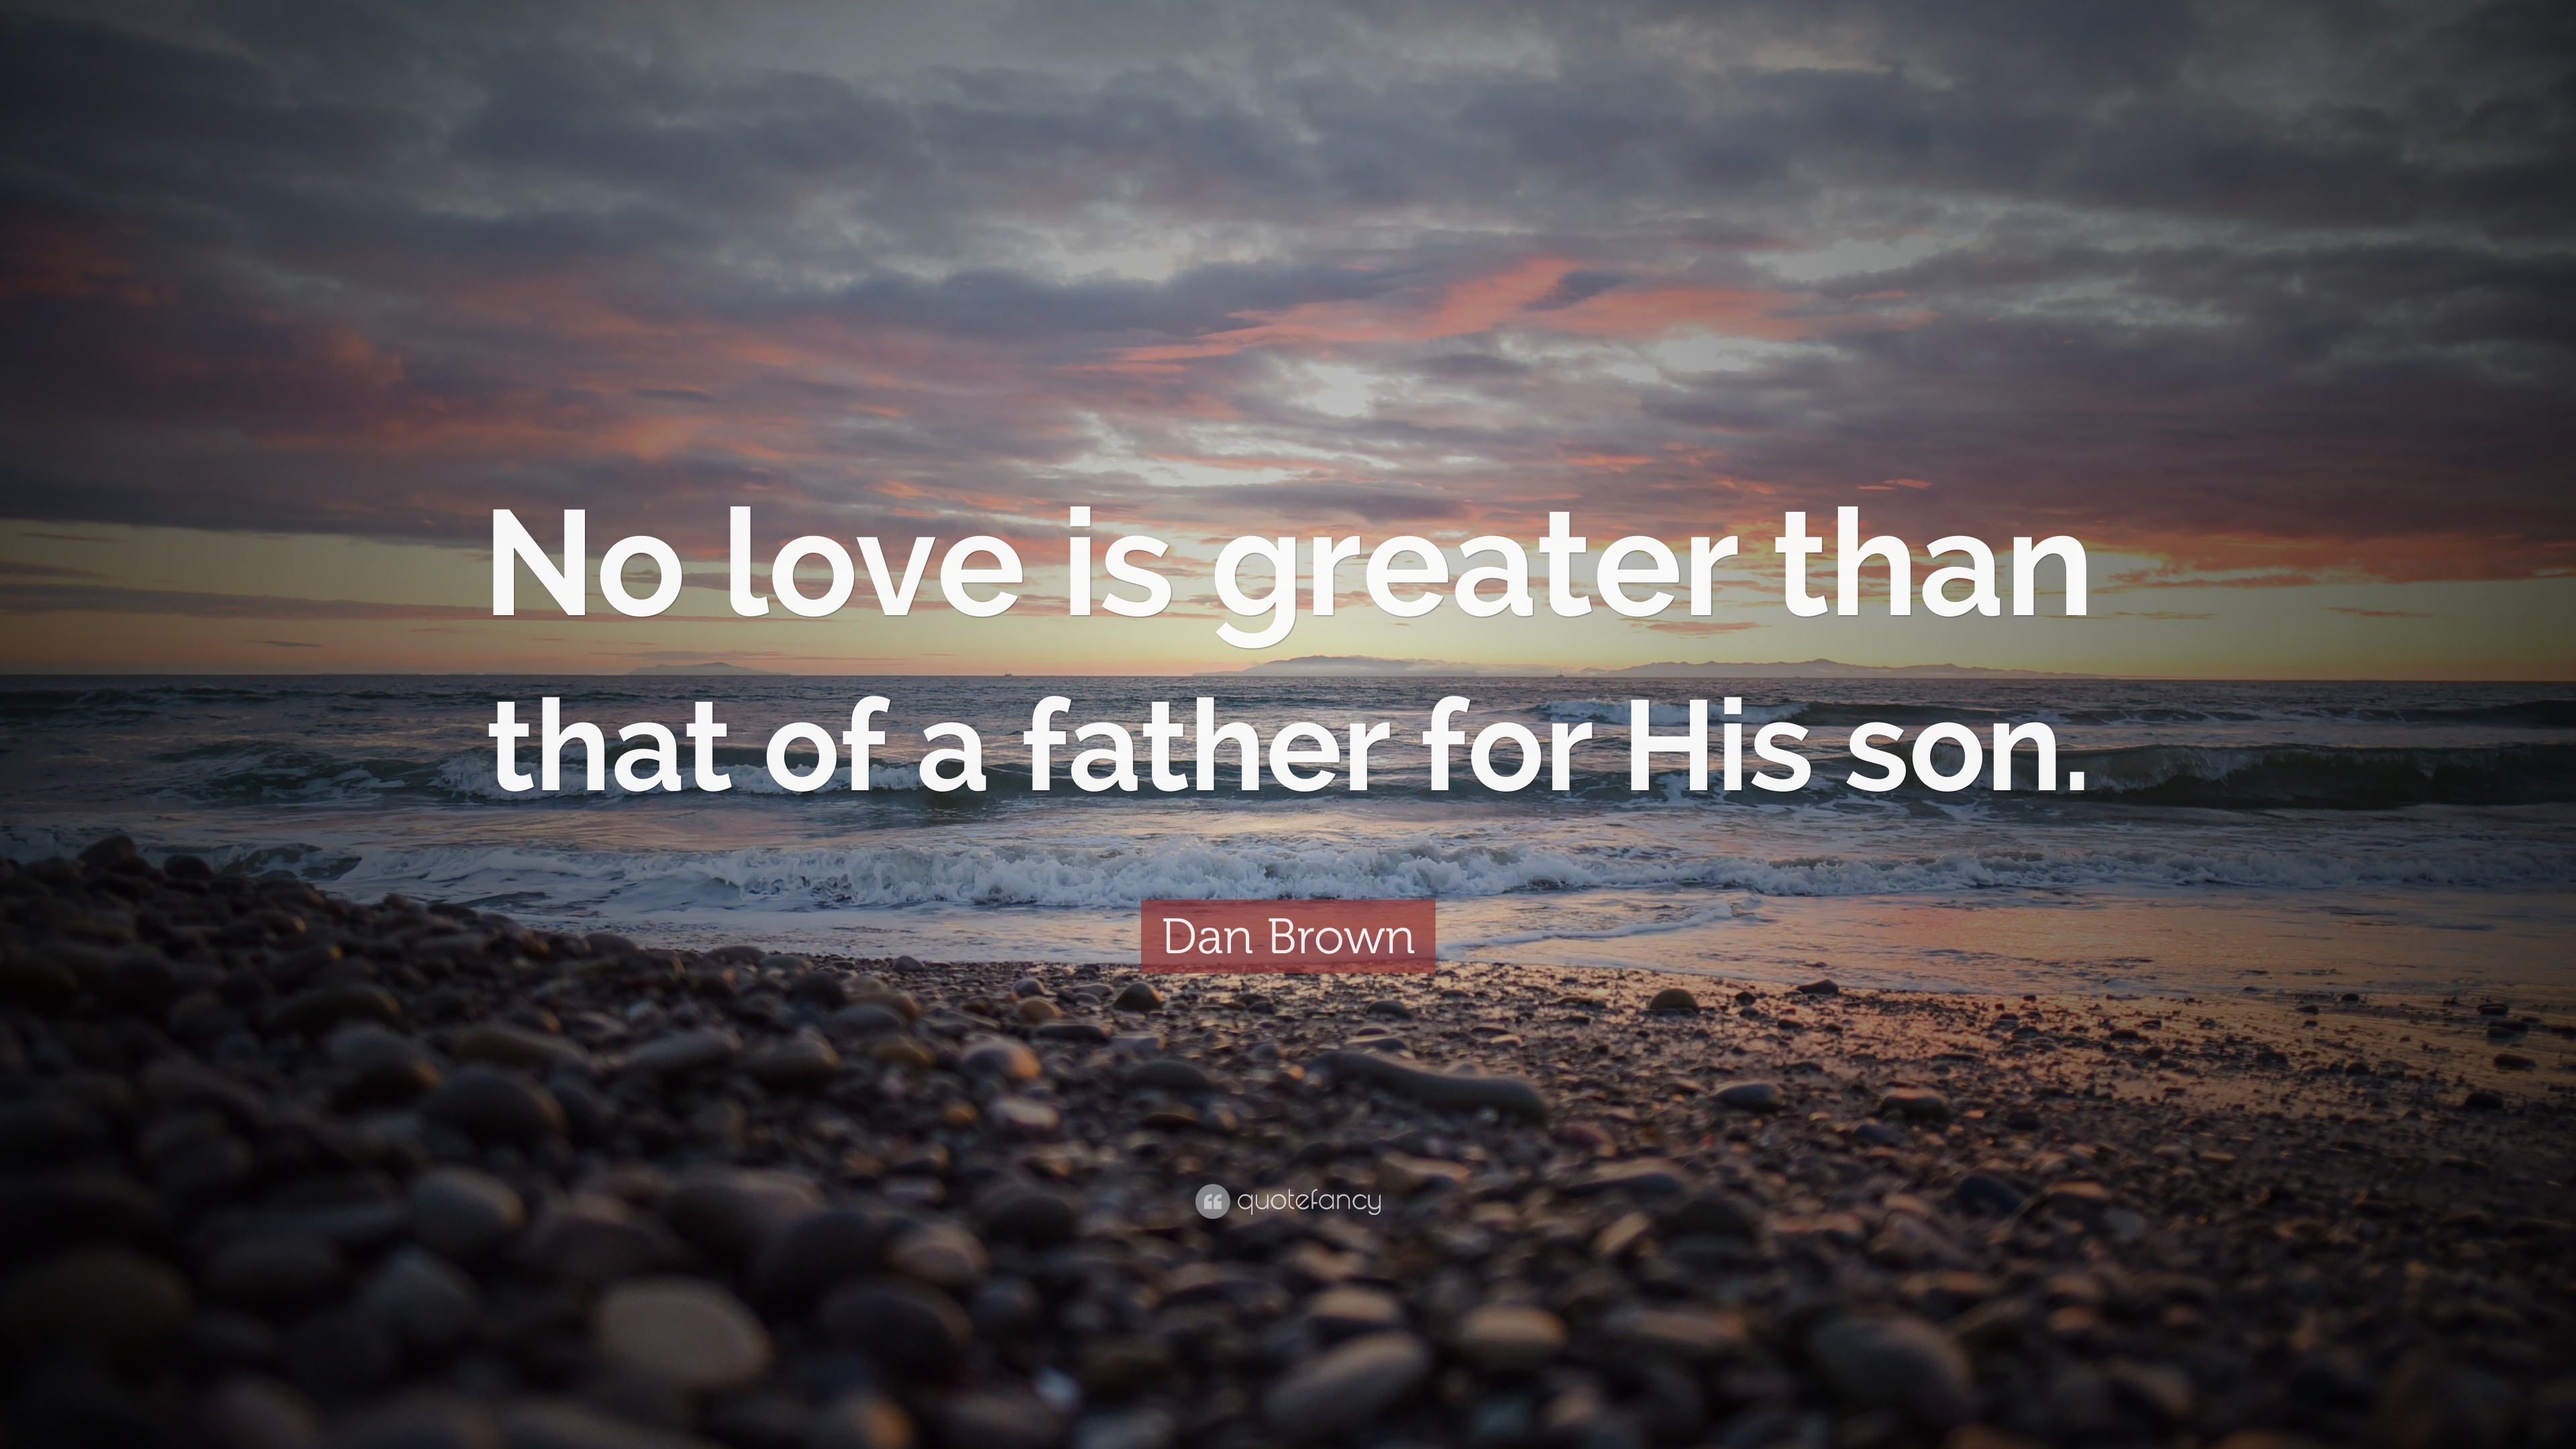 3840x2160 Dan Brown Quote: “No love is greater than that of a father for His